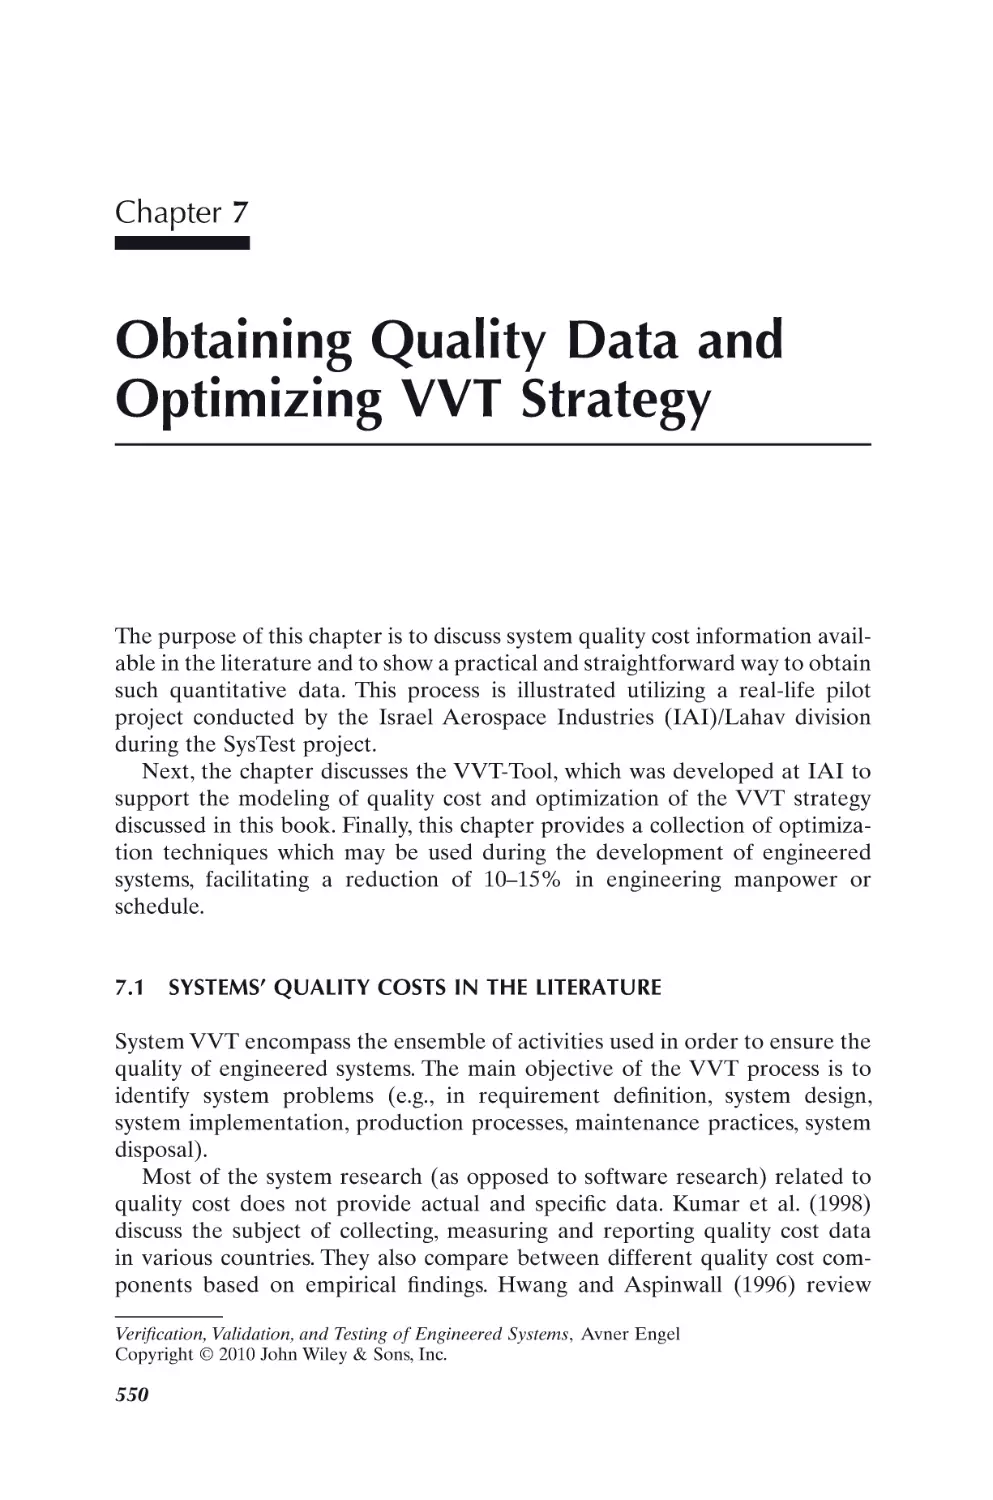 Chapter 7
7.1 SYSTEMS’ QUALITY COSTS IN THE LITERATURE